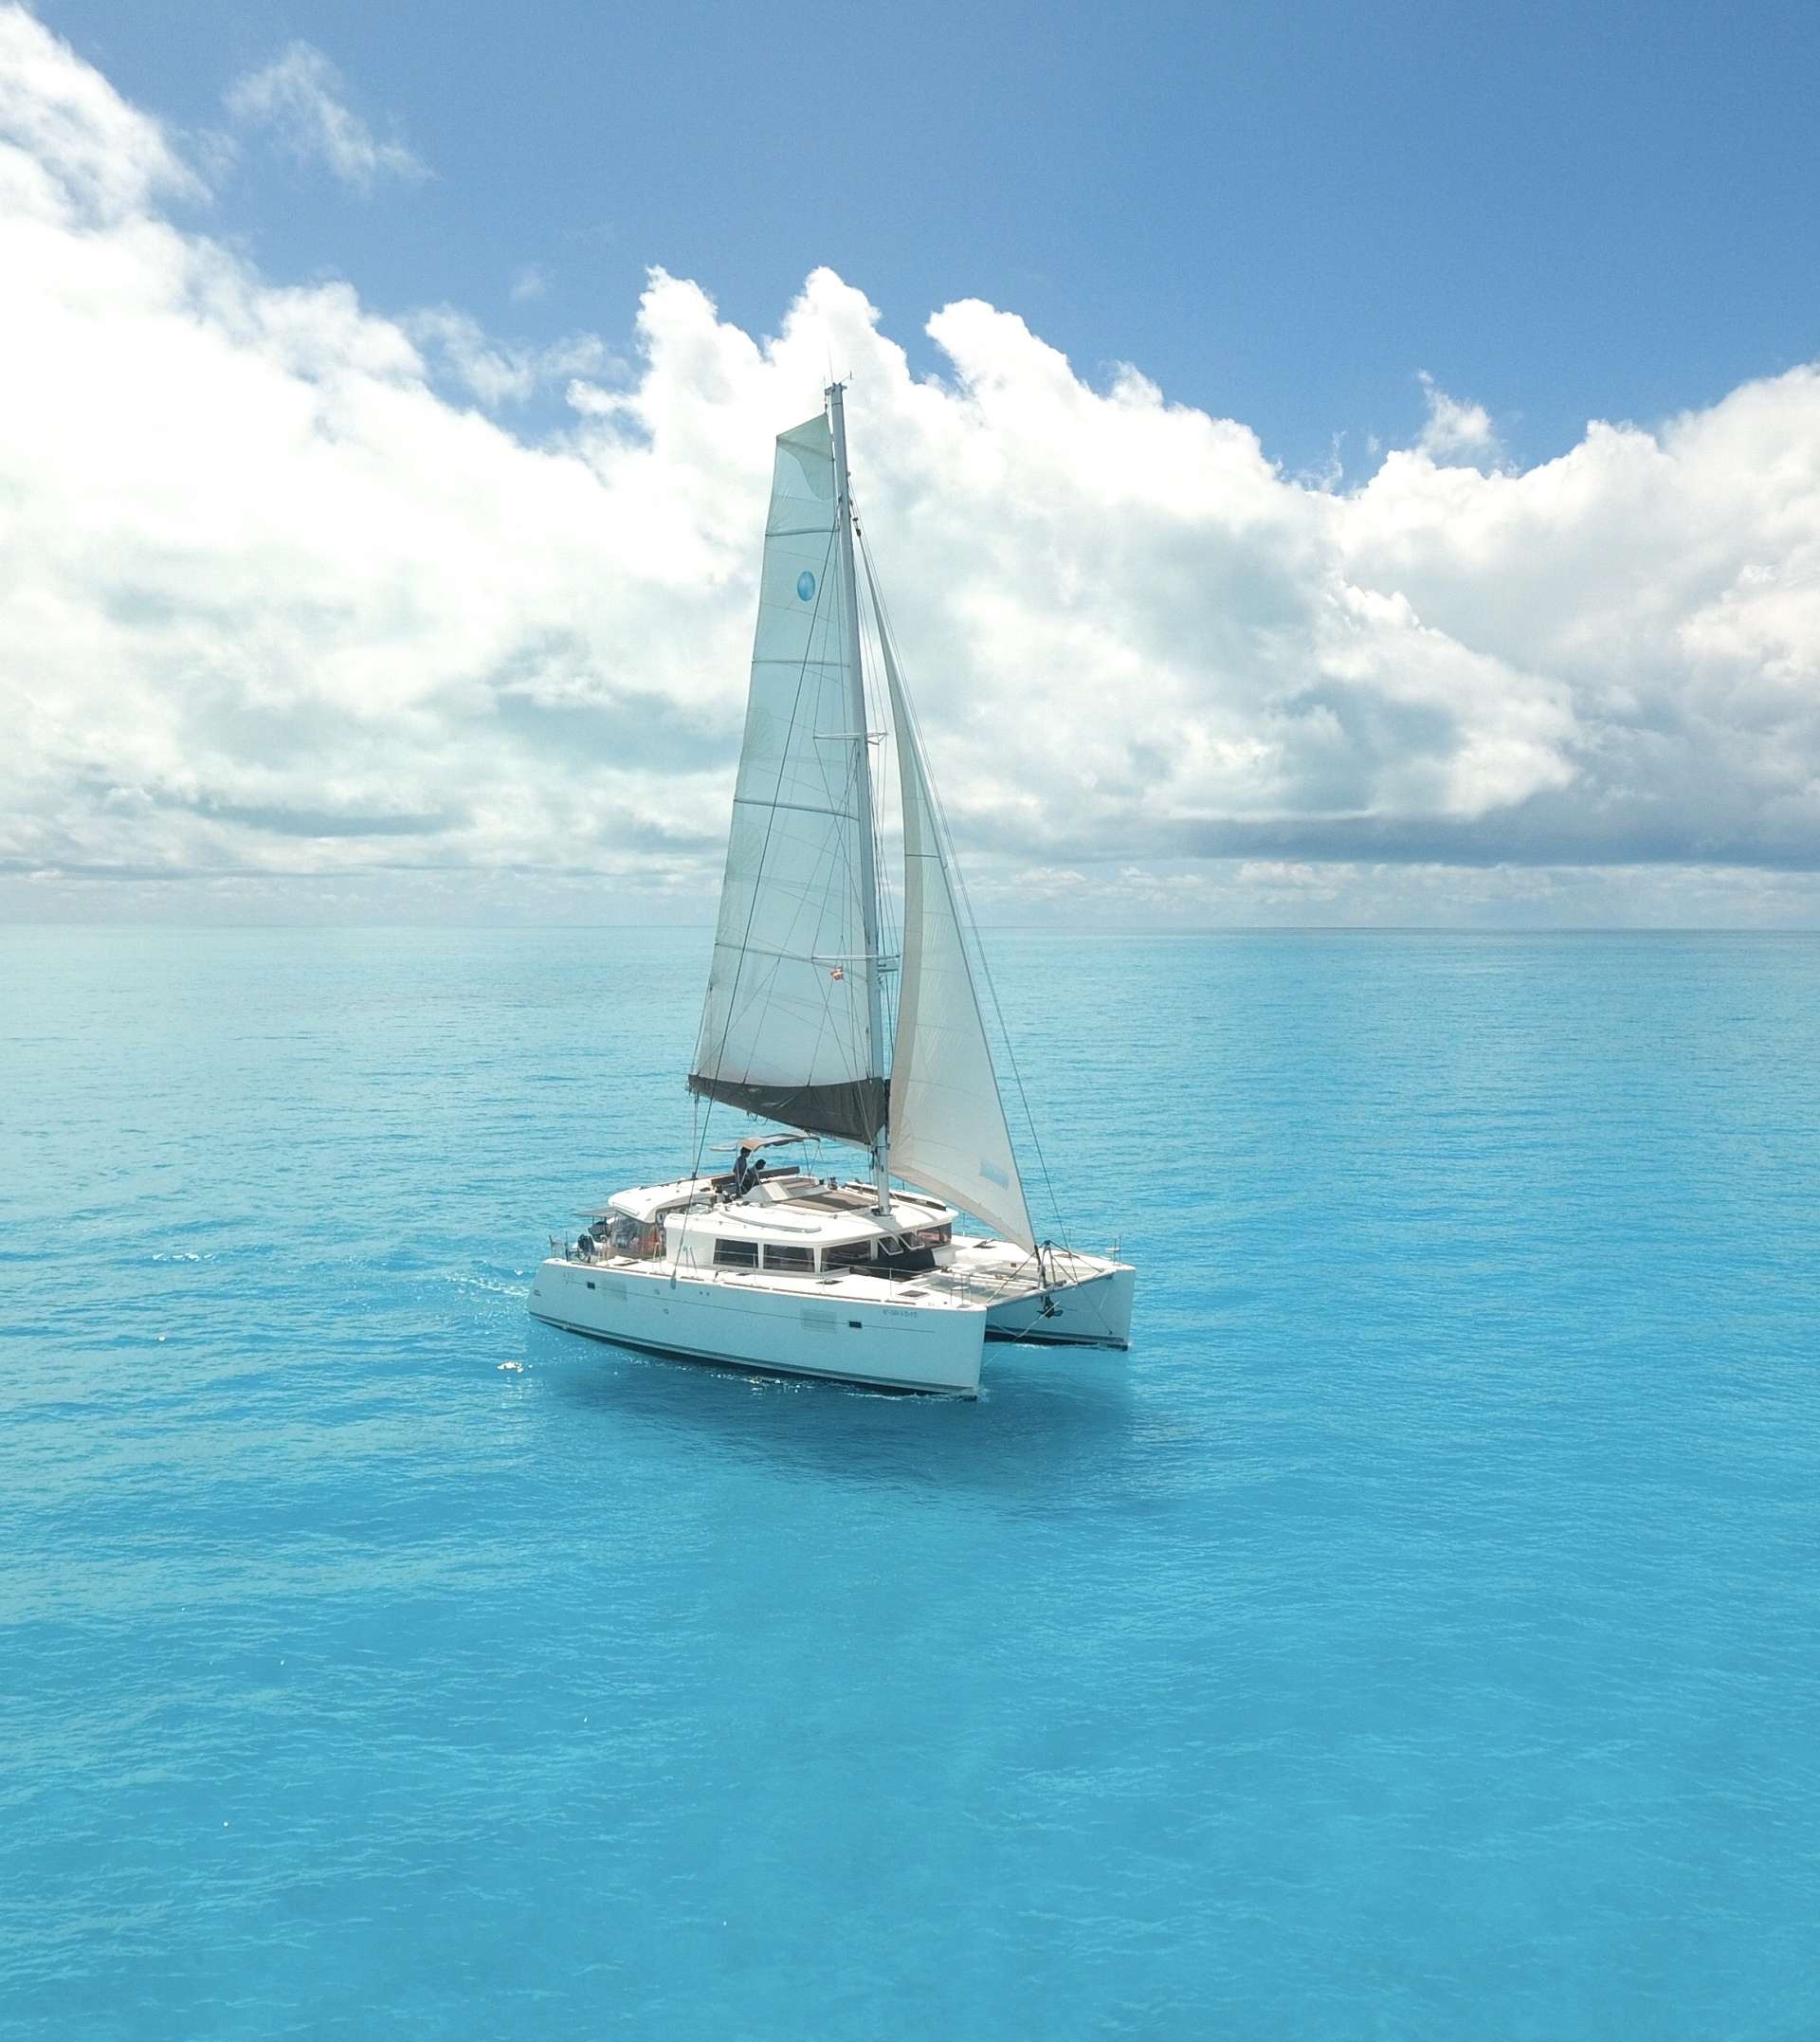 Catamaran: Madrigal V, A 45' charter cat built in 2015, Can accommodate up to 6 guest. 1920x2160 HD Wallpaper.